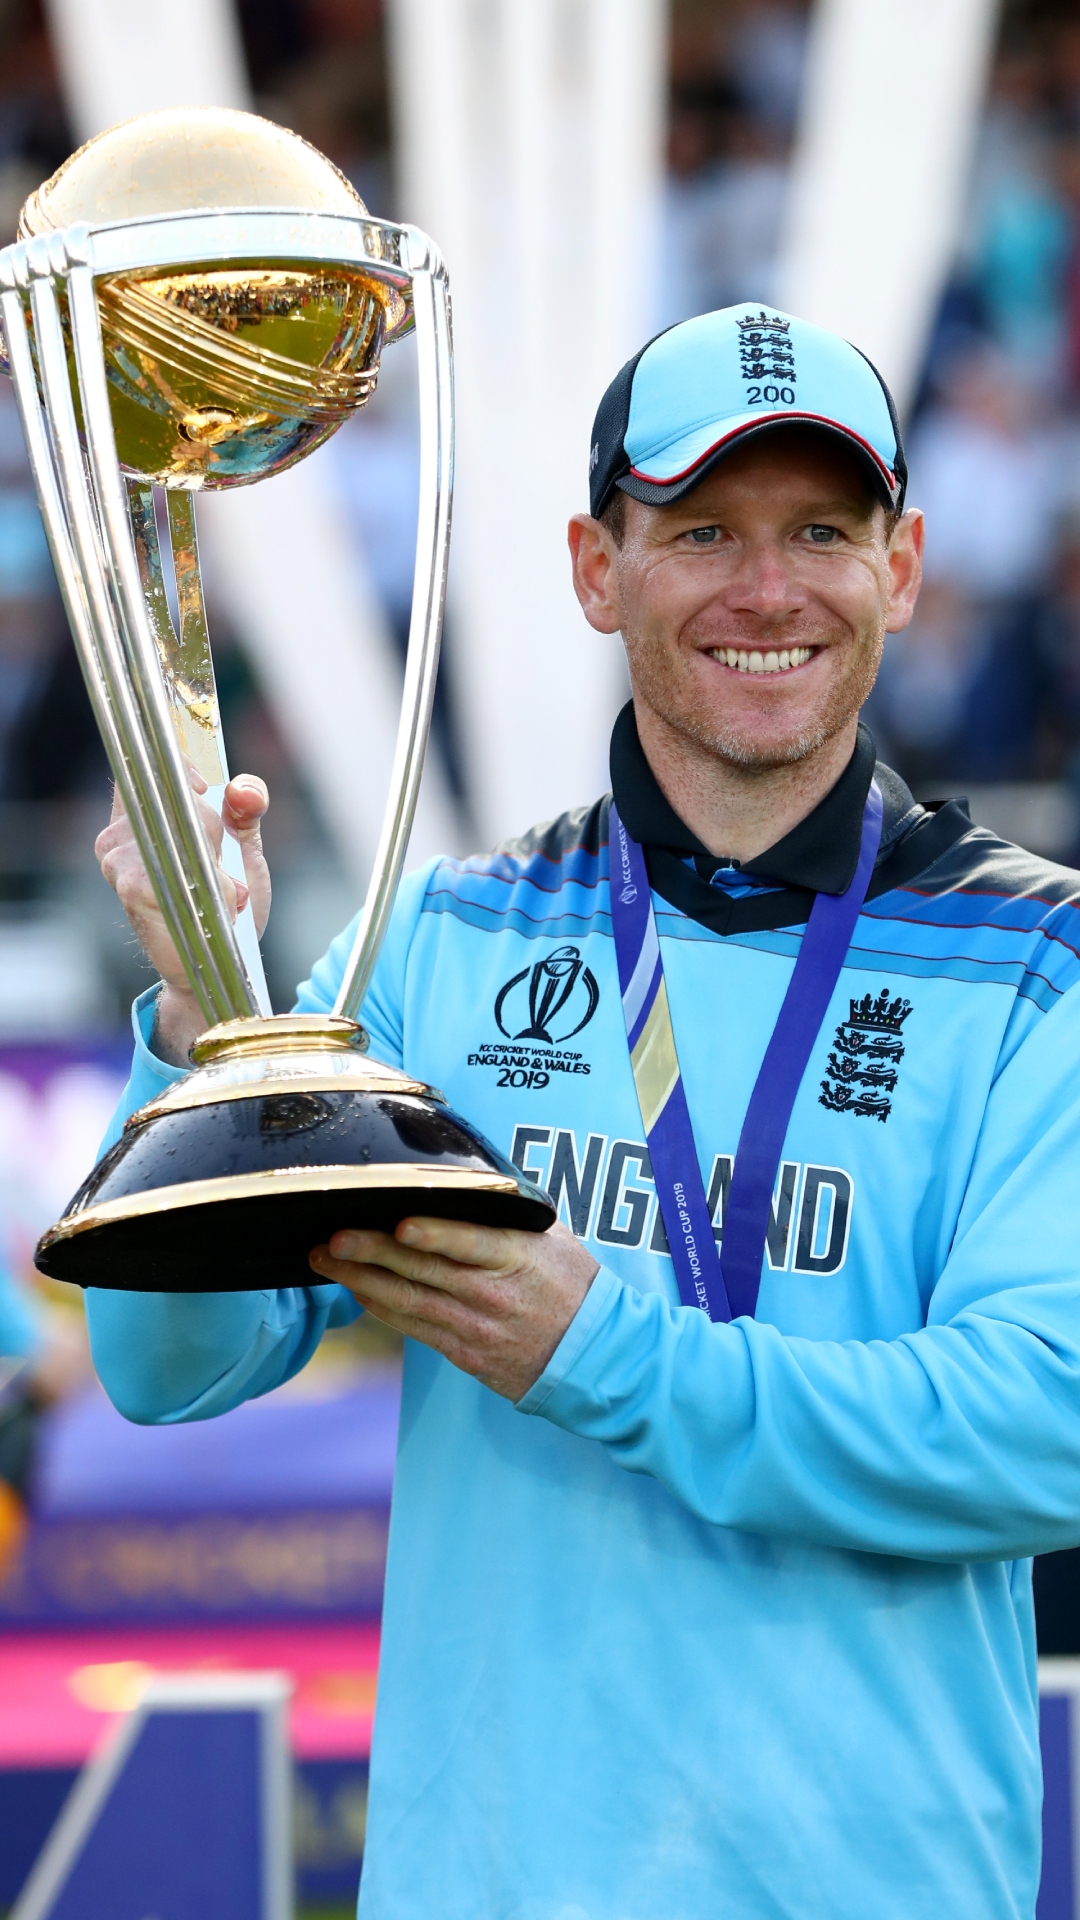 8 players who were part of India-England World Cup 2019 match but are not in the squad now